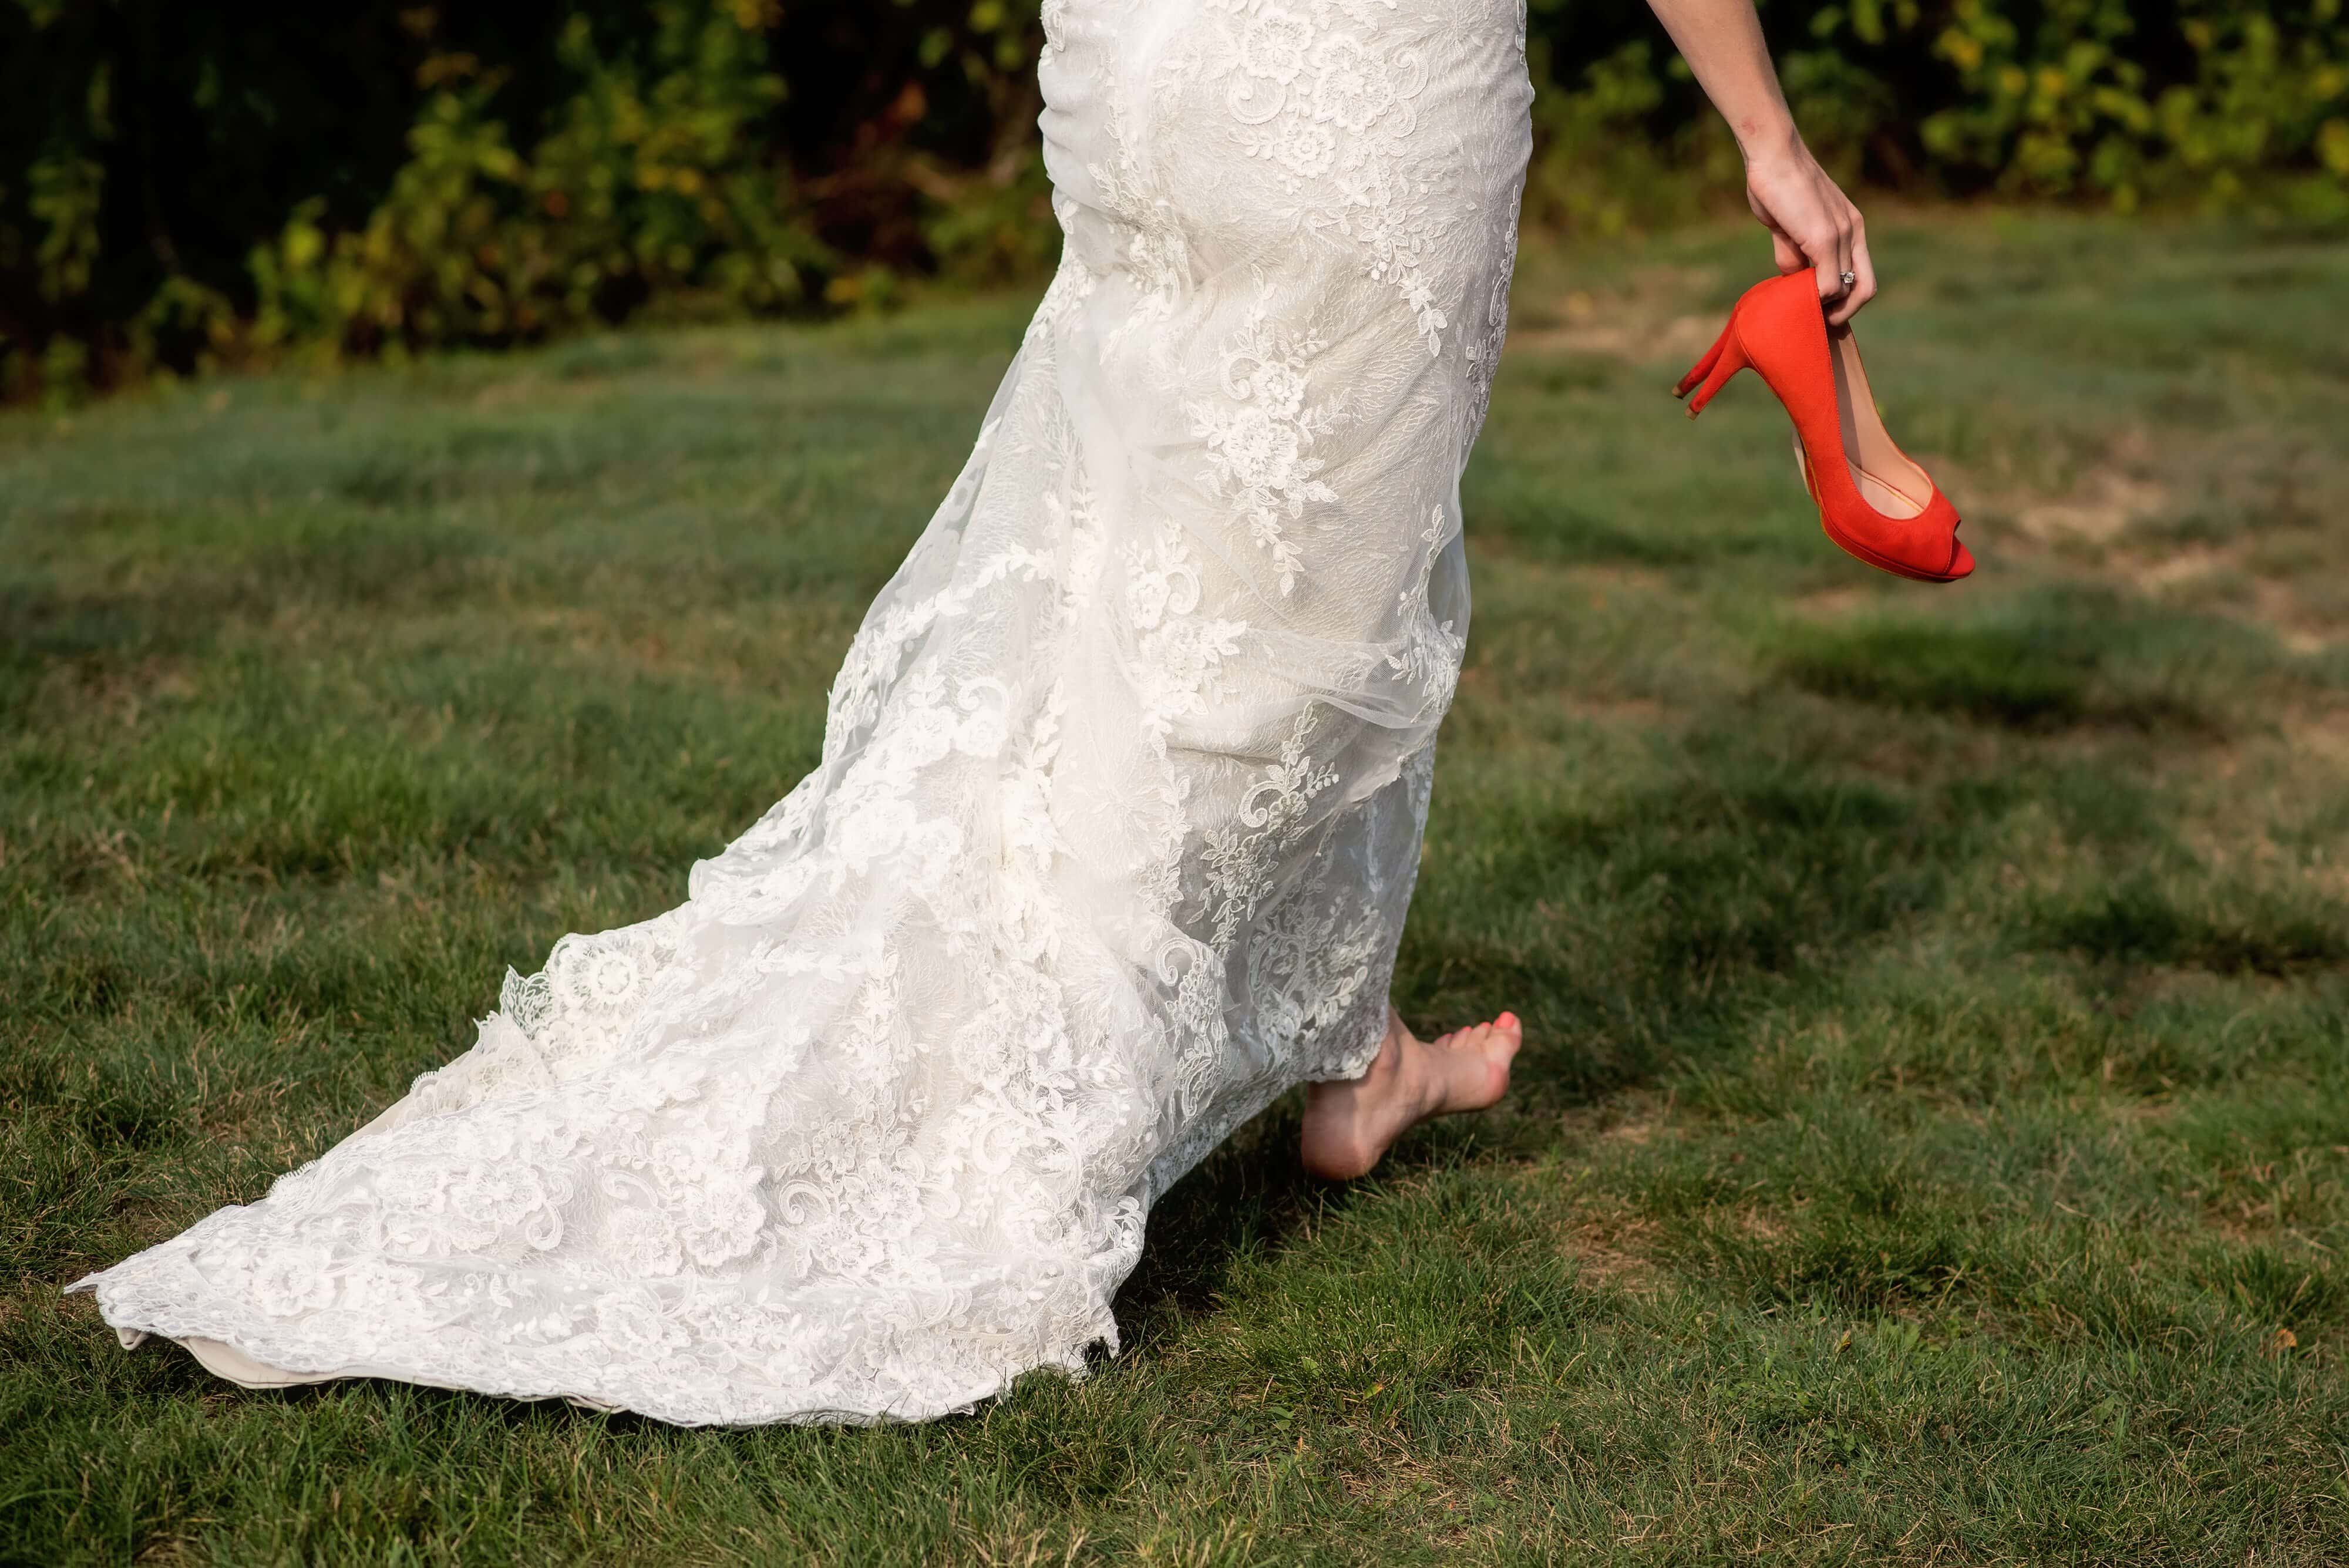 casual bride at mart has vineyard wedding carrying her red shoes after ceremony